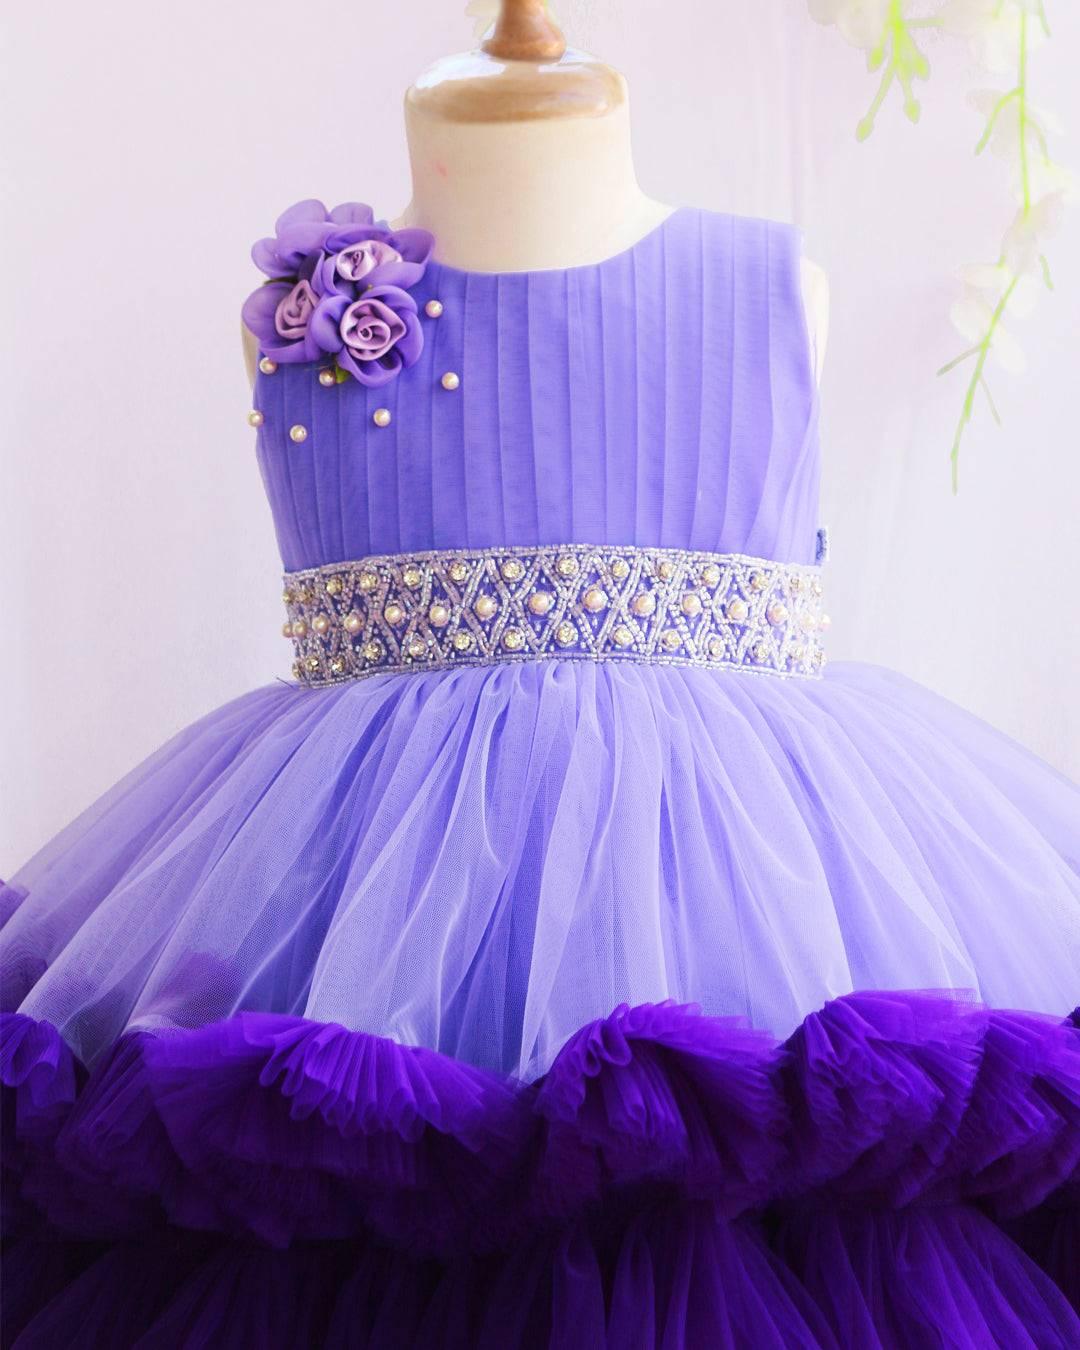 Lavender Violet Pleated heavy Ruffled party Wear Frock Stanwells Kids